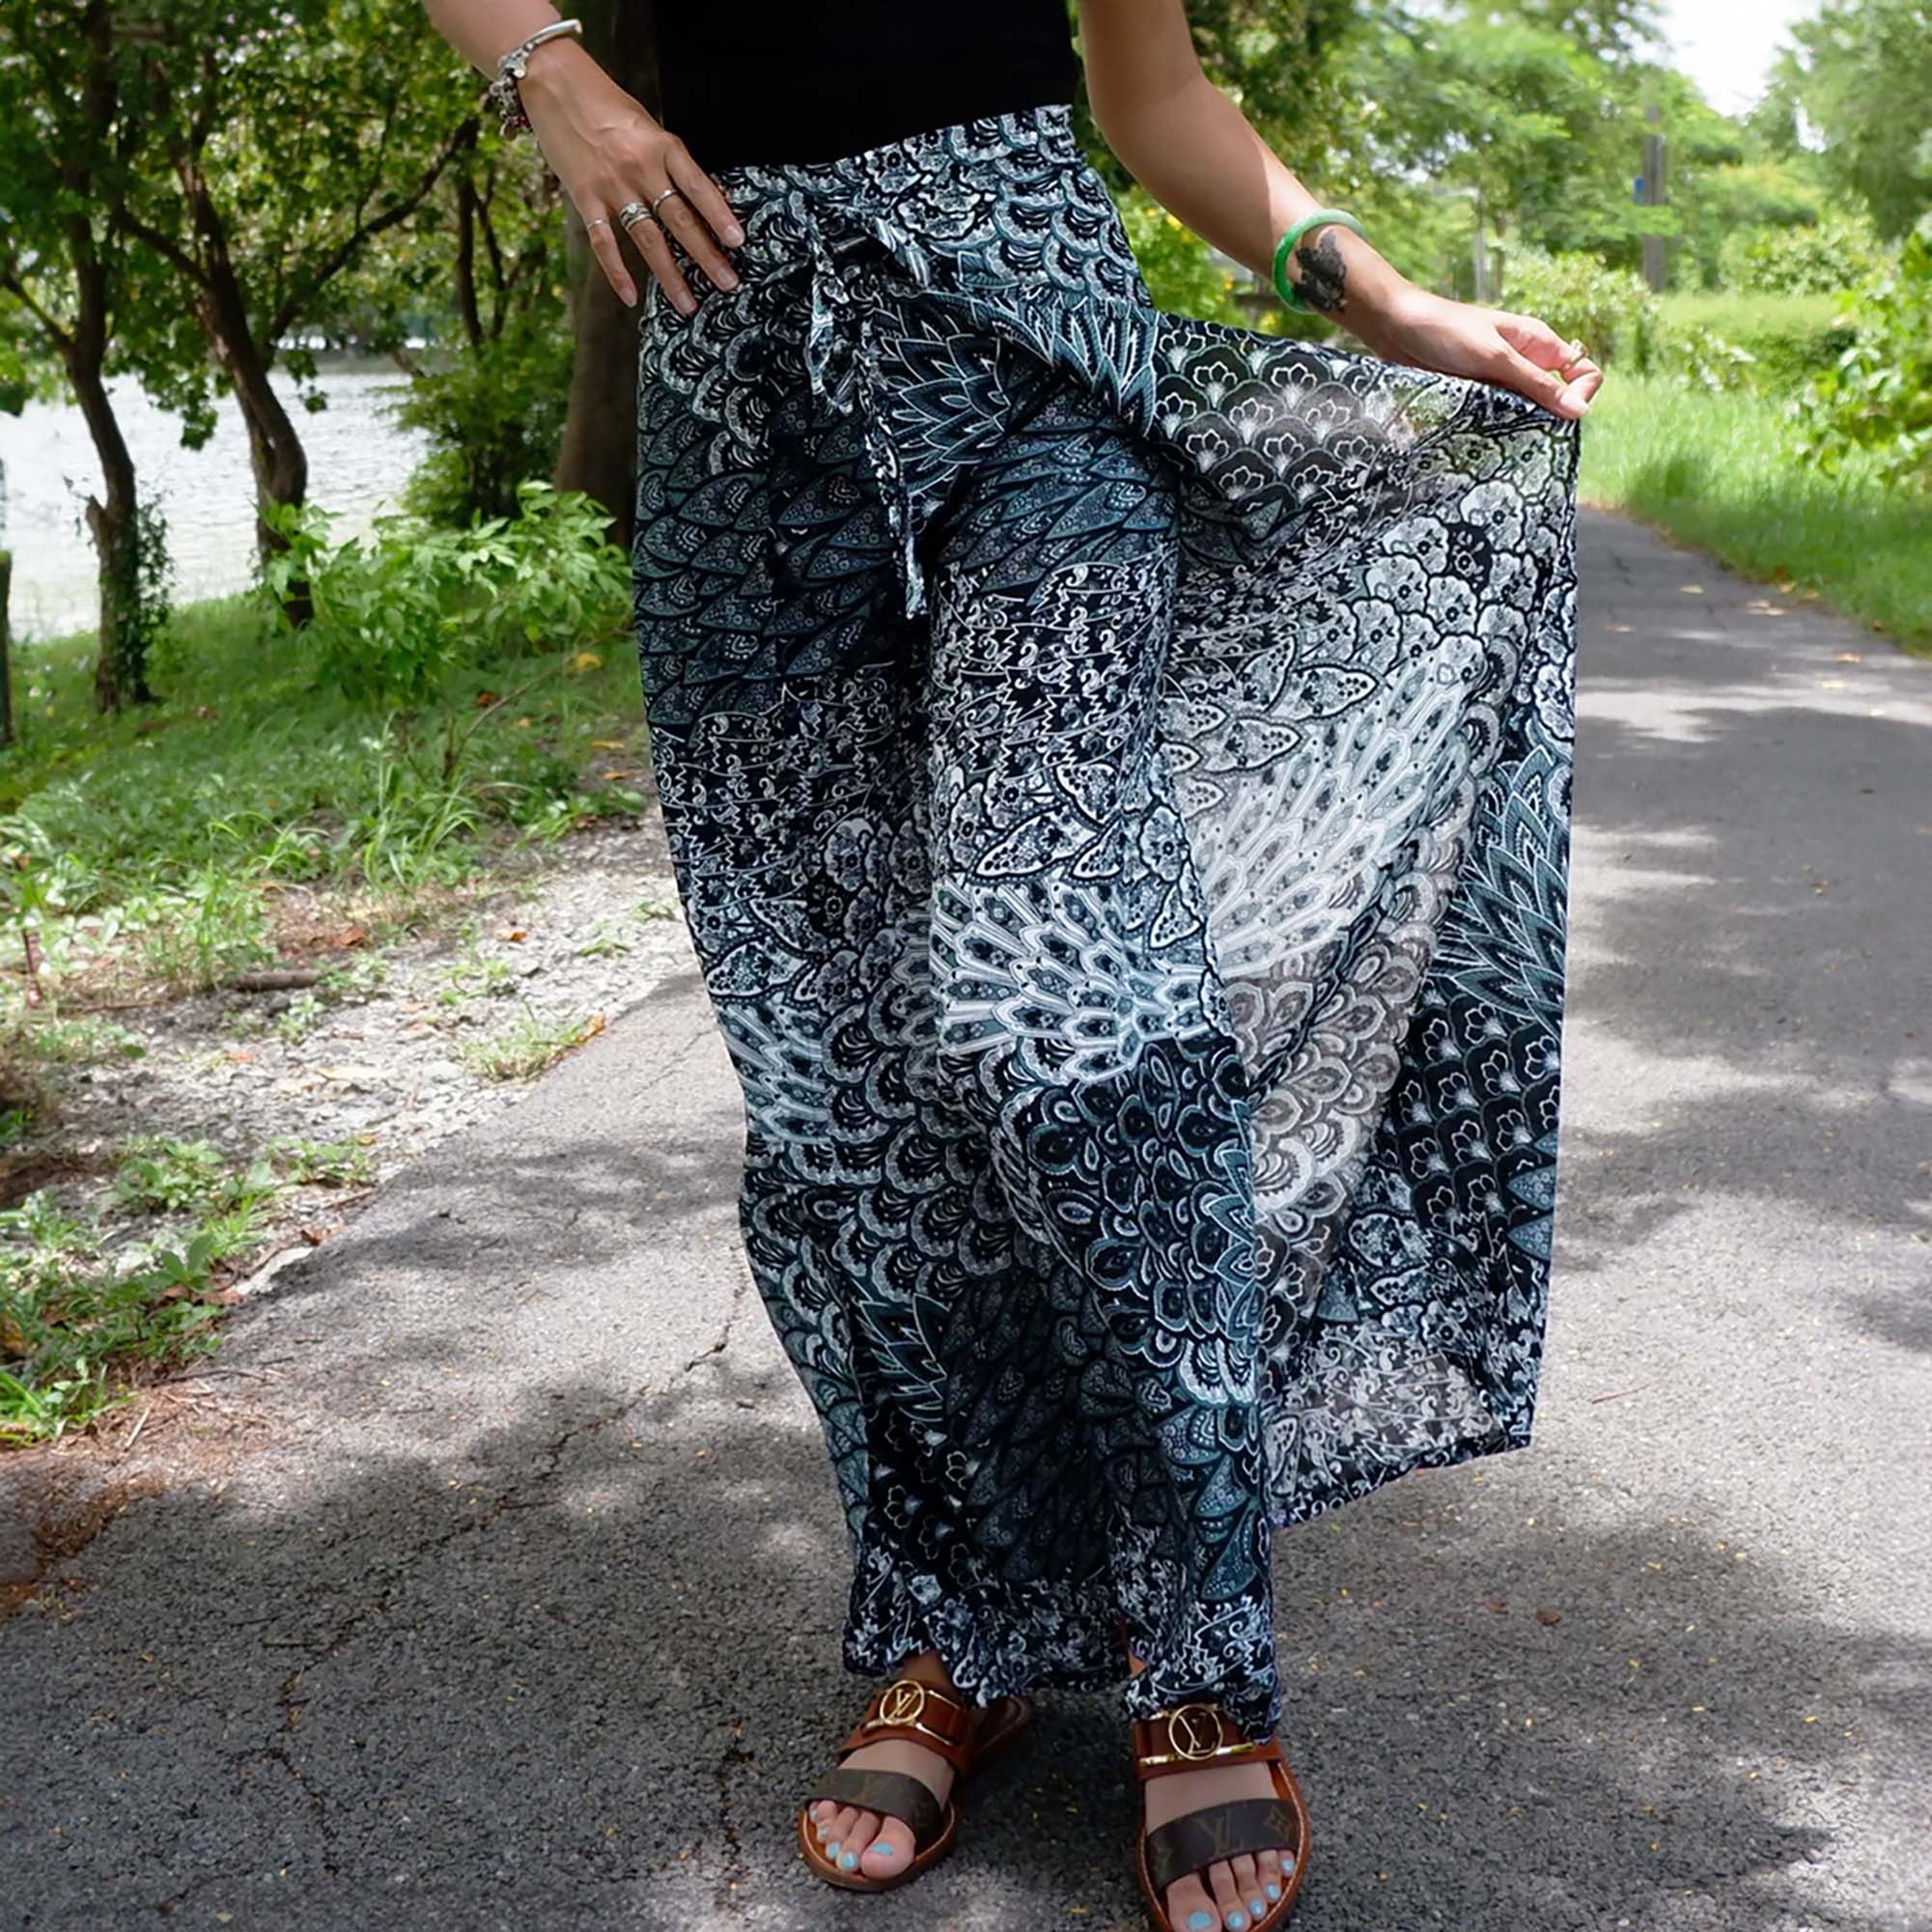 Chic boho wrap pants featuring Aegean teal petal print, embodying a relaxed yet fashionable bohemian style.